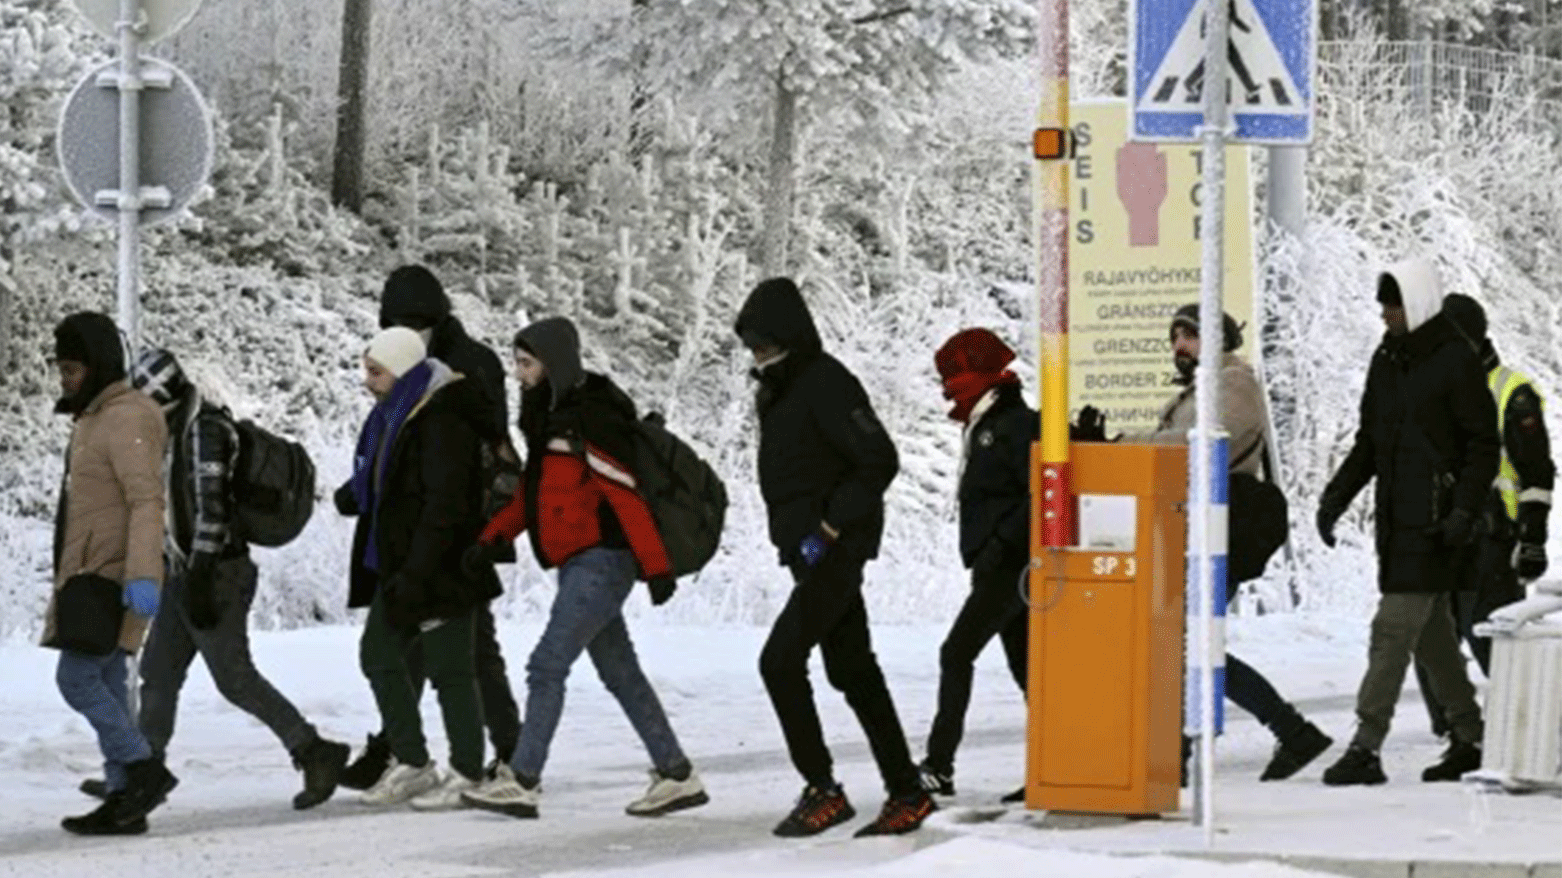 Migrants are seen at the international border crossing at Salla, northern Finland. (Photo: AFP)